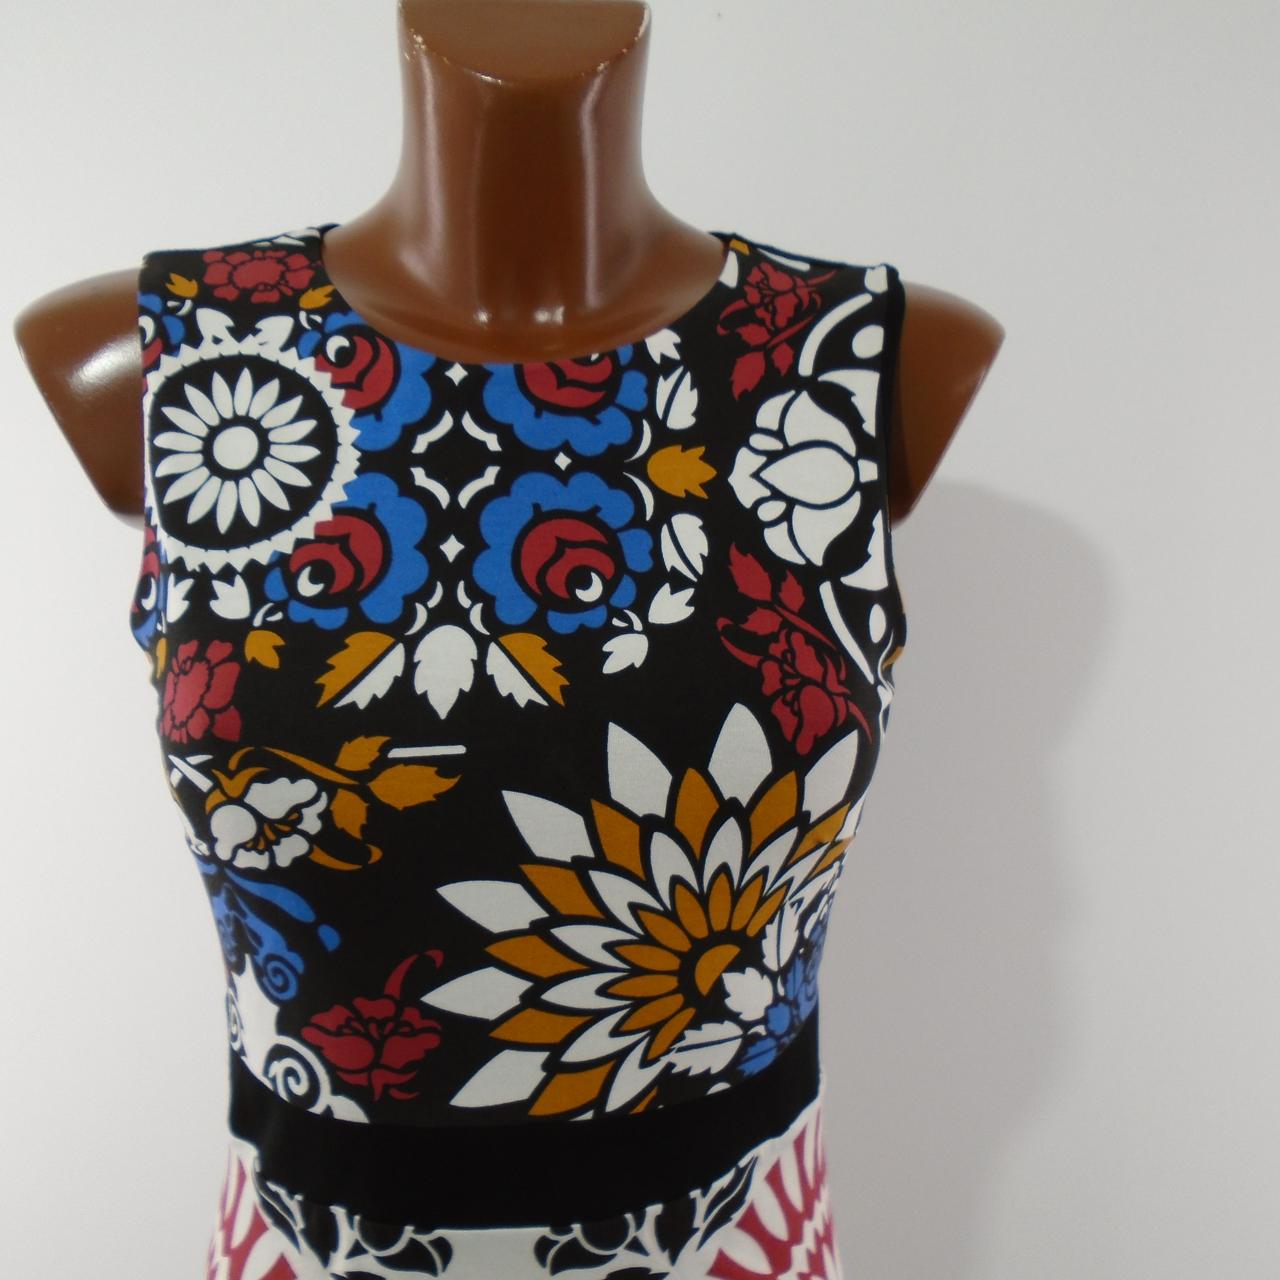 Women's Dress Desigual. Multicolor. S. New without tags